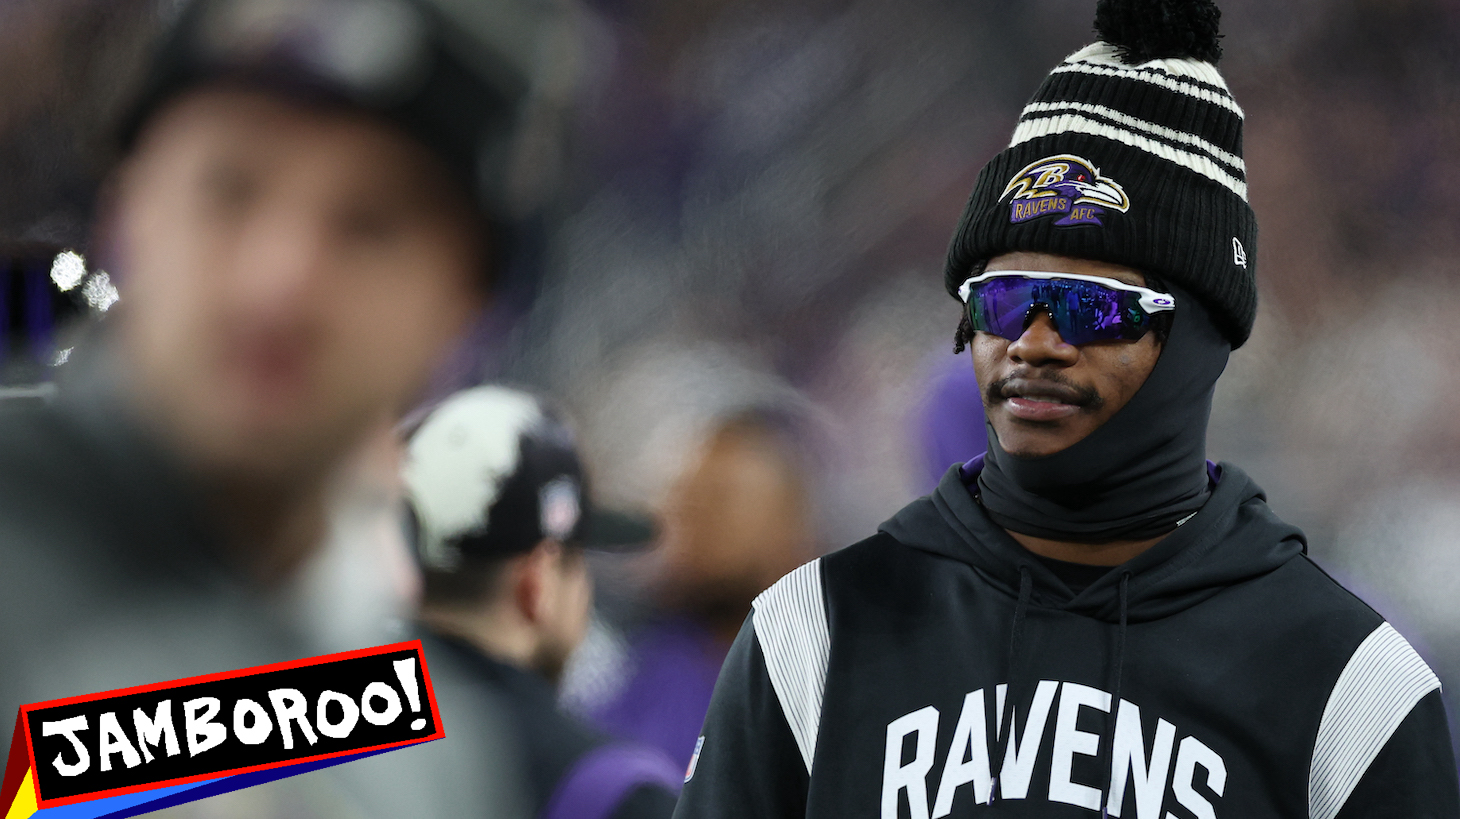 BALTIMORE, MARYLAND - JANUARY 01: Quarterback Lamar Jackson #8 of the Baltimore Ravens looks on from the sideline as the Baltimore Ravens play against the Pittsburgh Steelers at M&T Bank Stadium on January 1, 2023 in Baltimore, Maryland. (Photo by Patrick Smith/Getty Images)